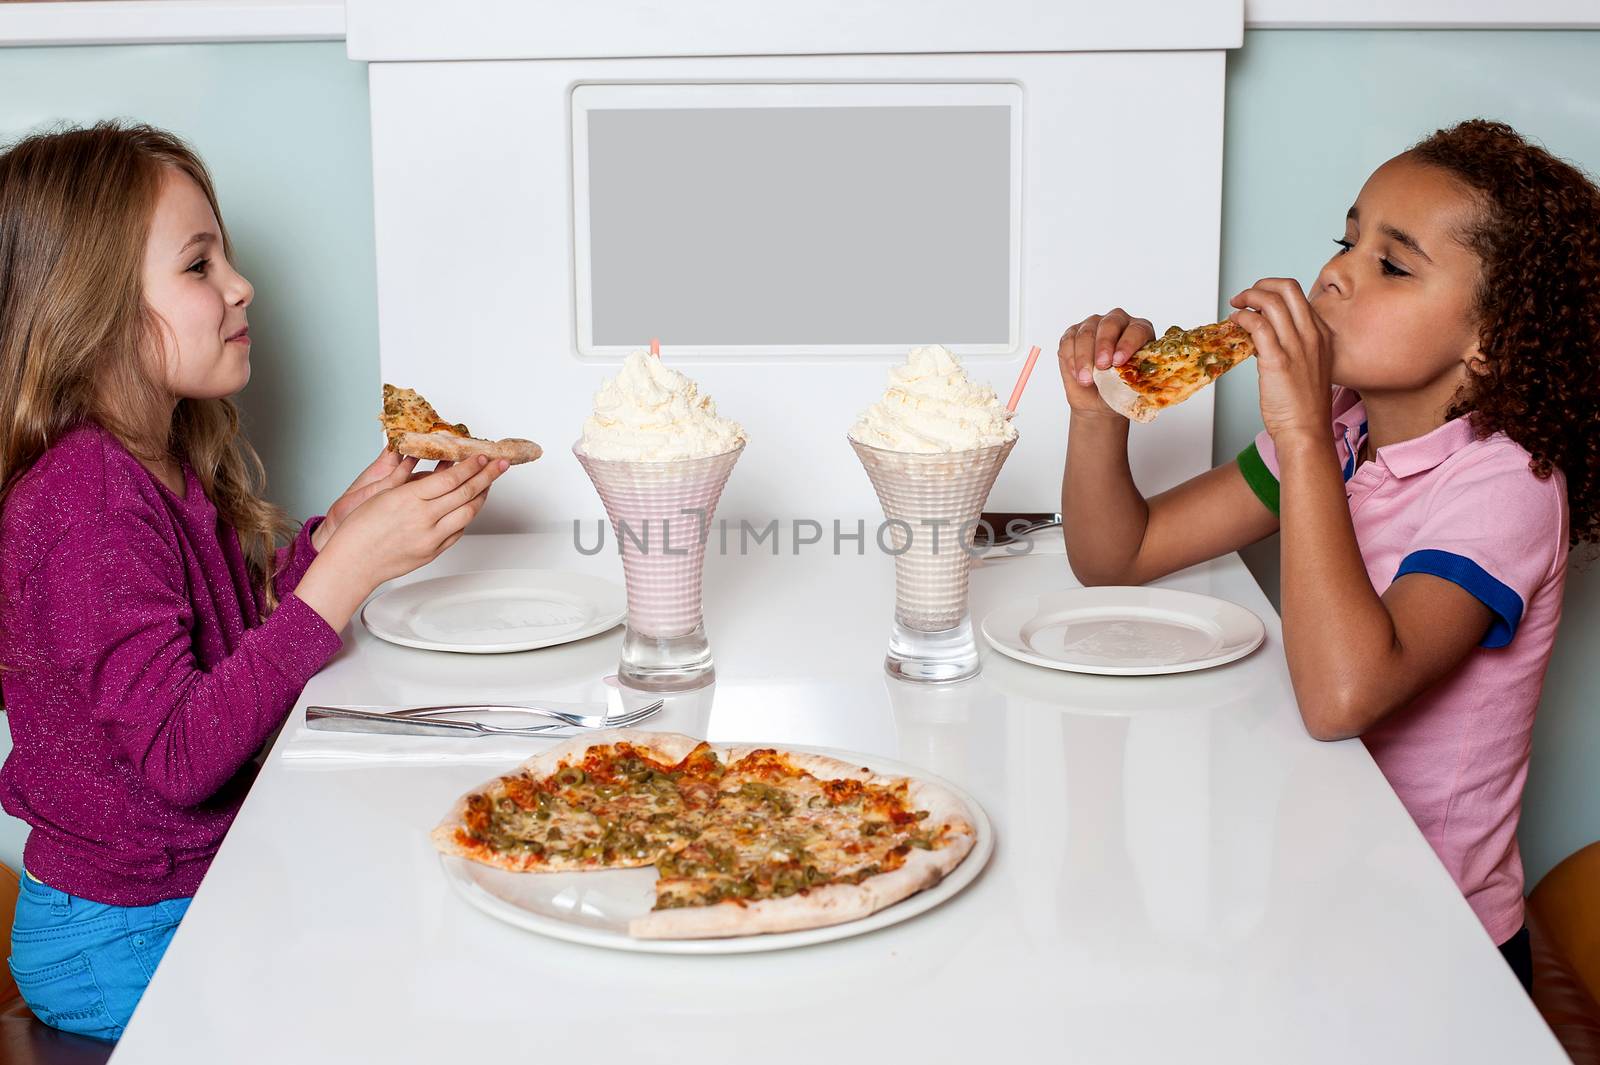 Cute girls eating pizza together in a restaurant